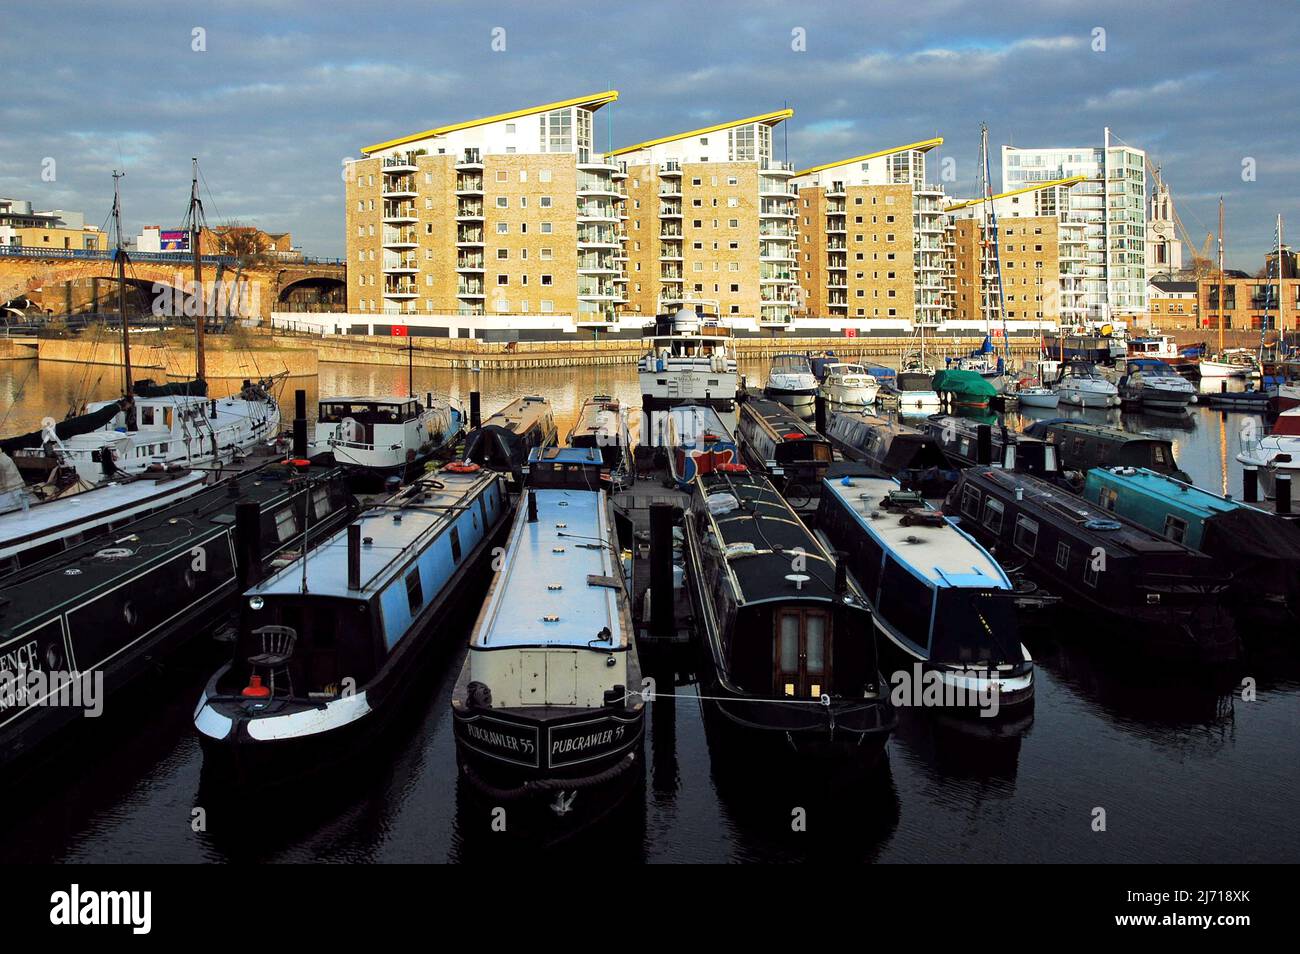 Boats and residential properties, Limehouse Basin in London UK. Stock Photo